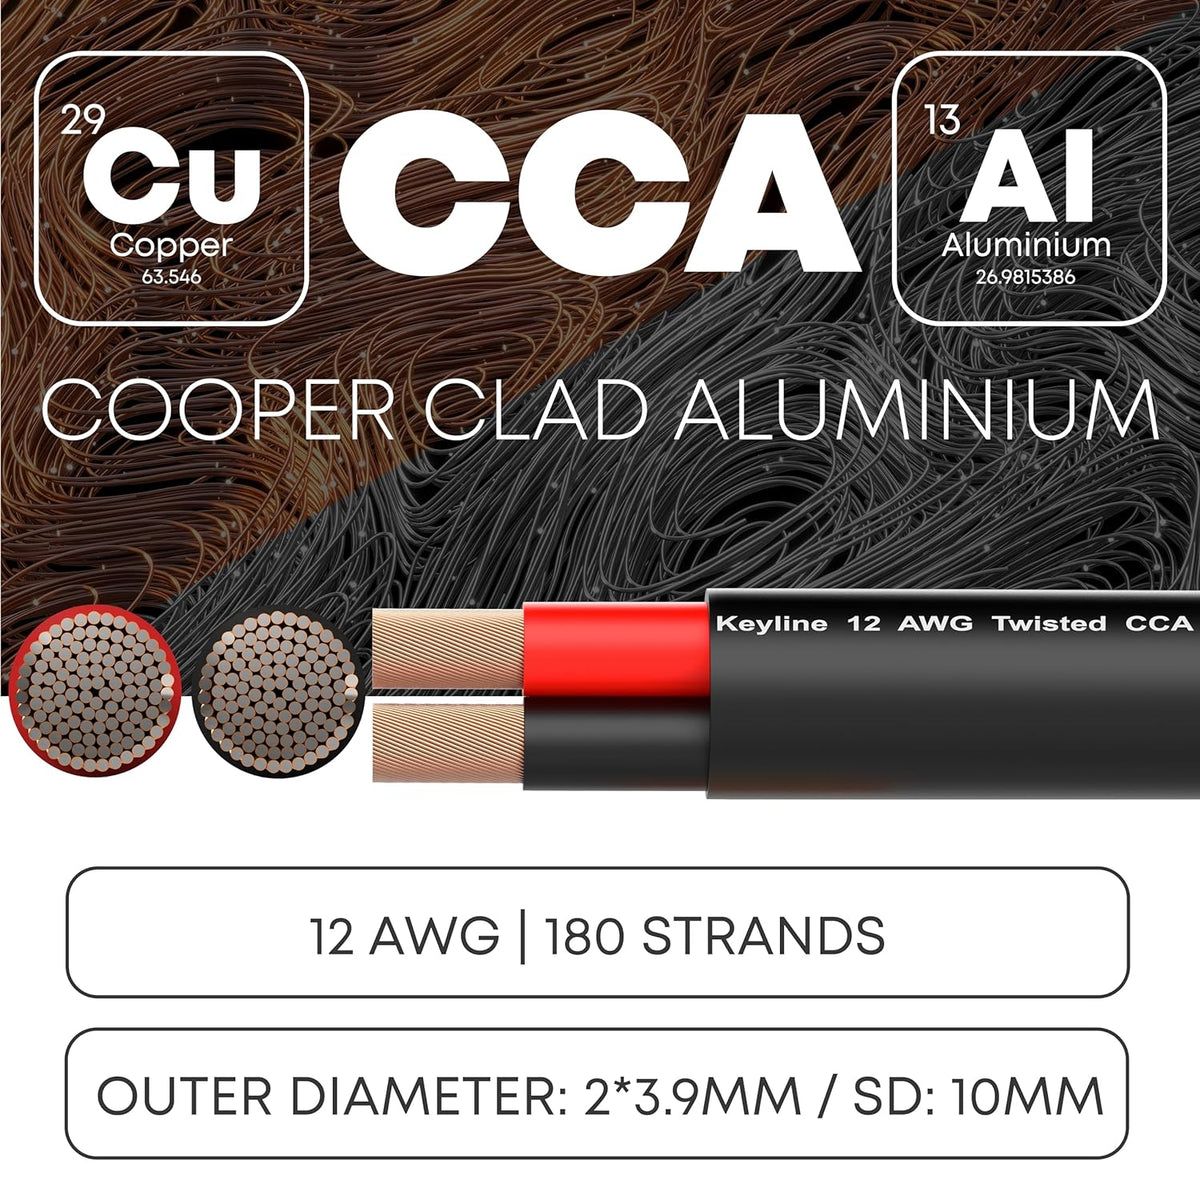 12 Gauge Speaker Wire - 100 Feet Black| 12-2 AWG Gauge - Outdoor Speaker Wire, CL3 CL2 Rated for in Ground Burial & in Wall / 2 Conductors - Marine Speaker Wire CCA Copper Clad Aluminum, Black 100ft